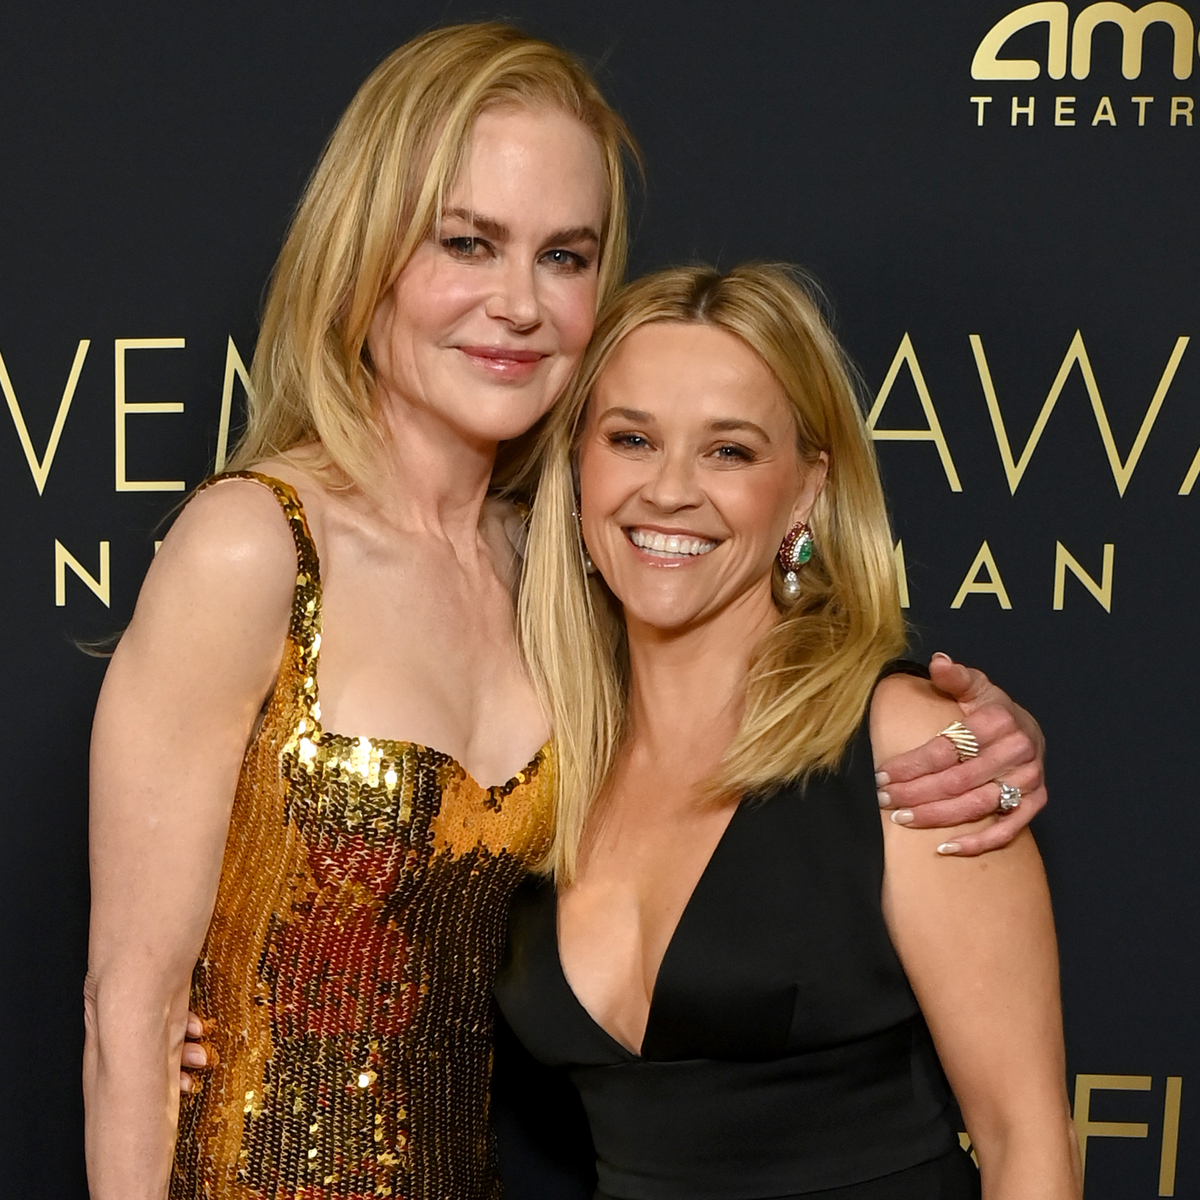 Reese Witherspoon Reacts After Nicole Kidman Forgets Her Real Name